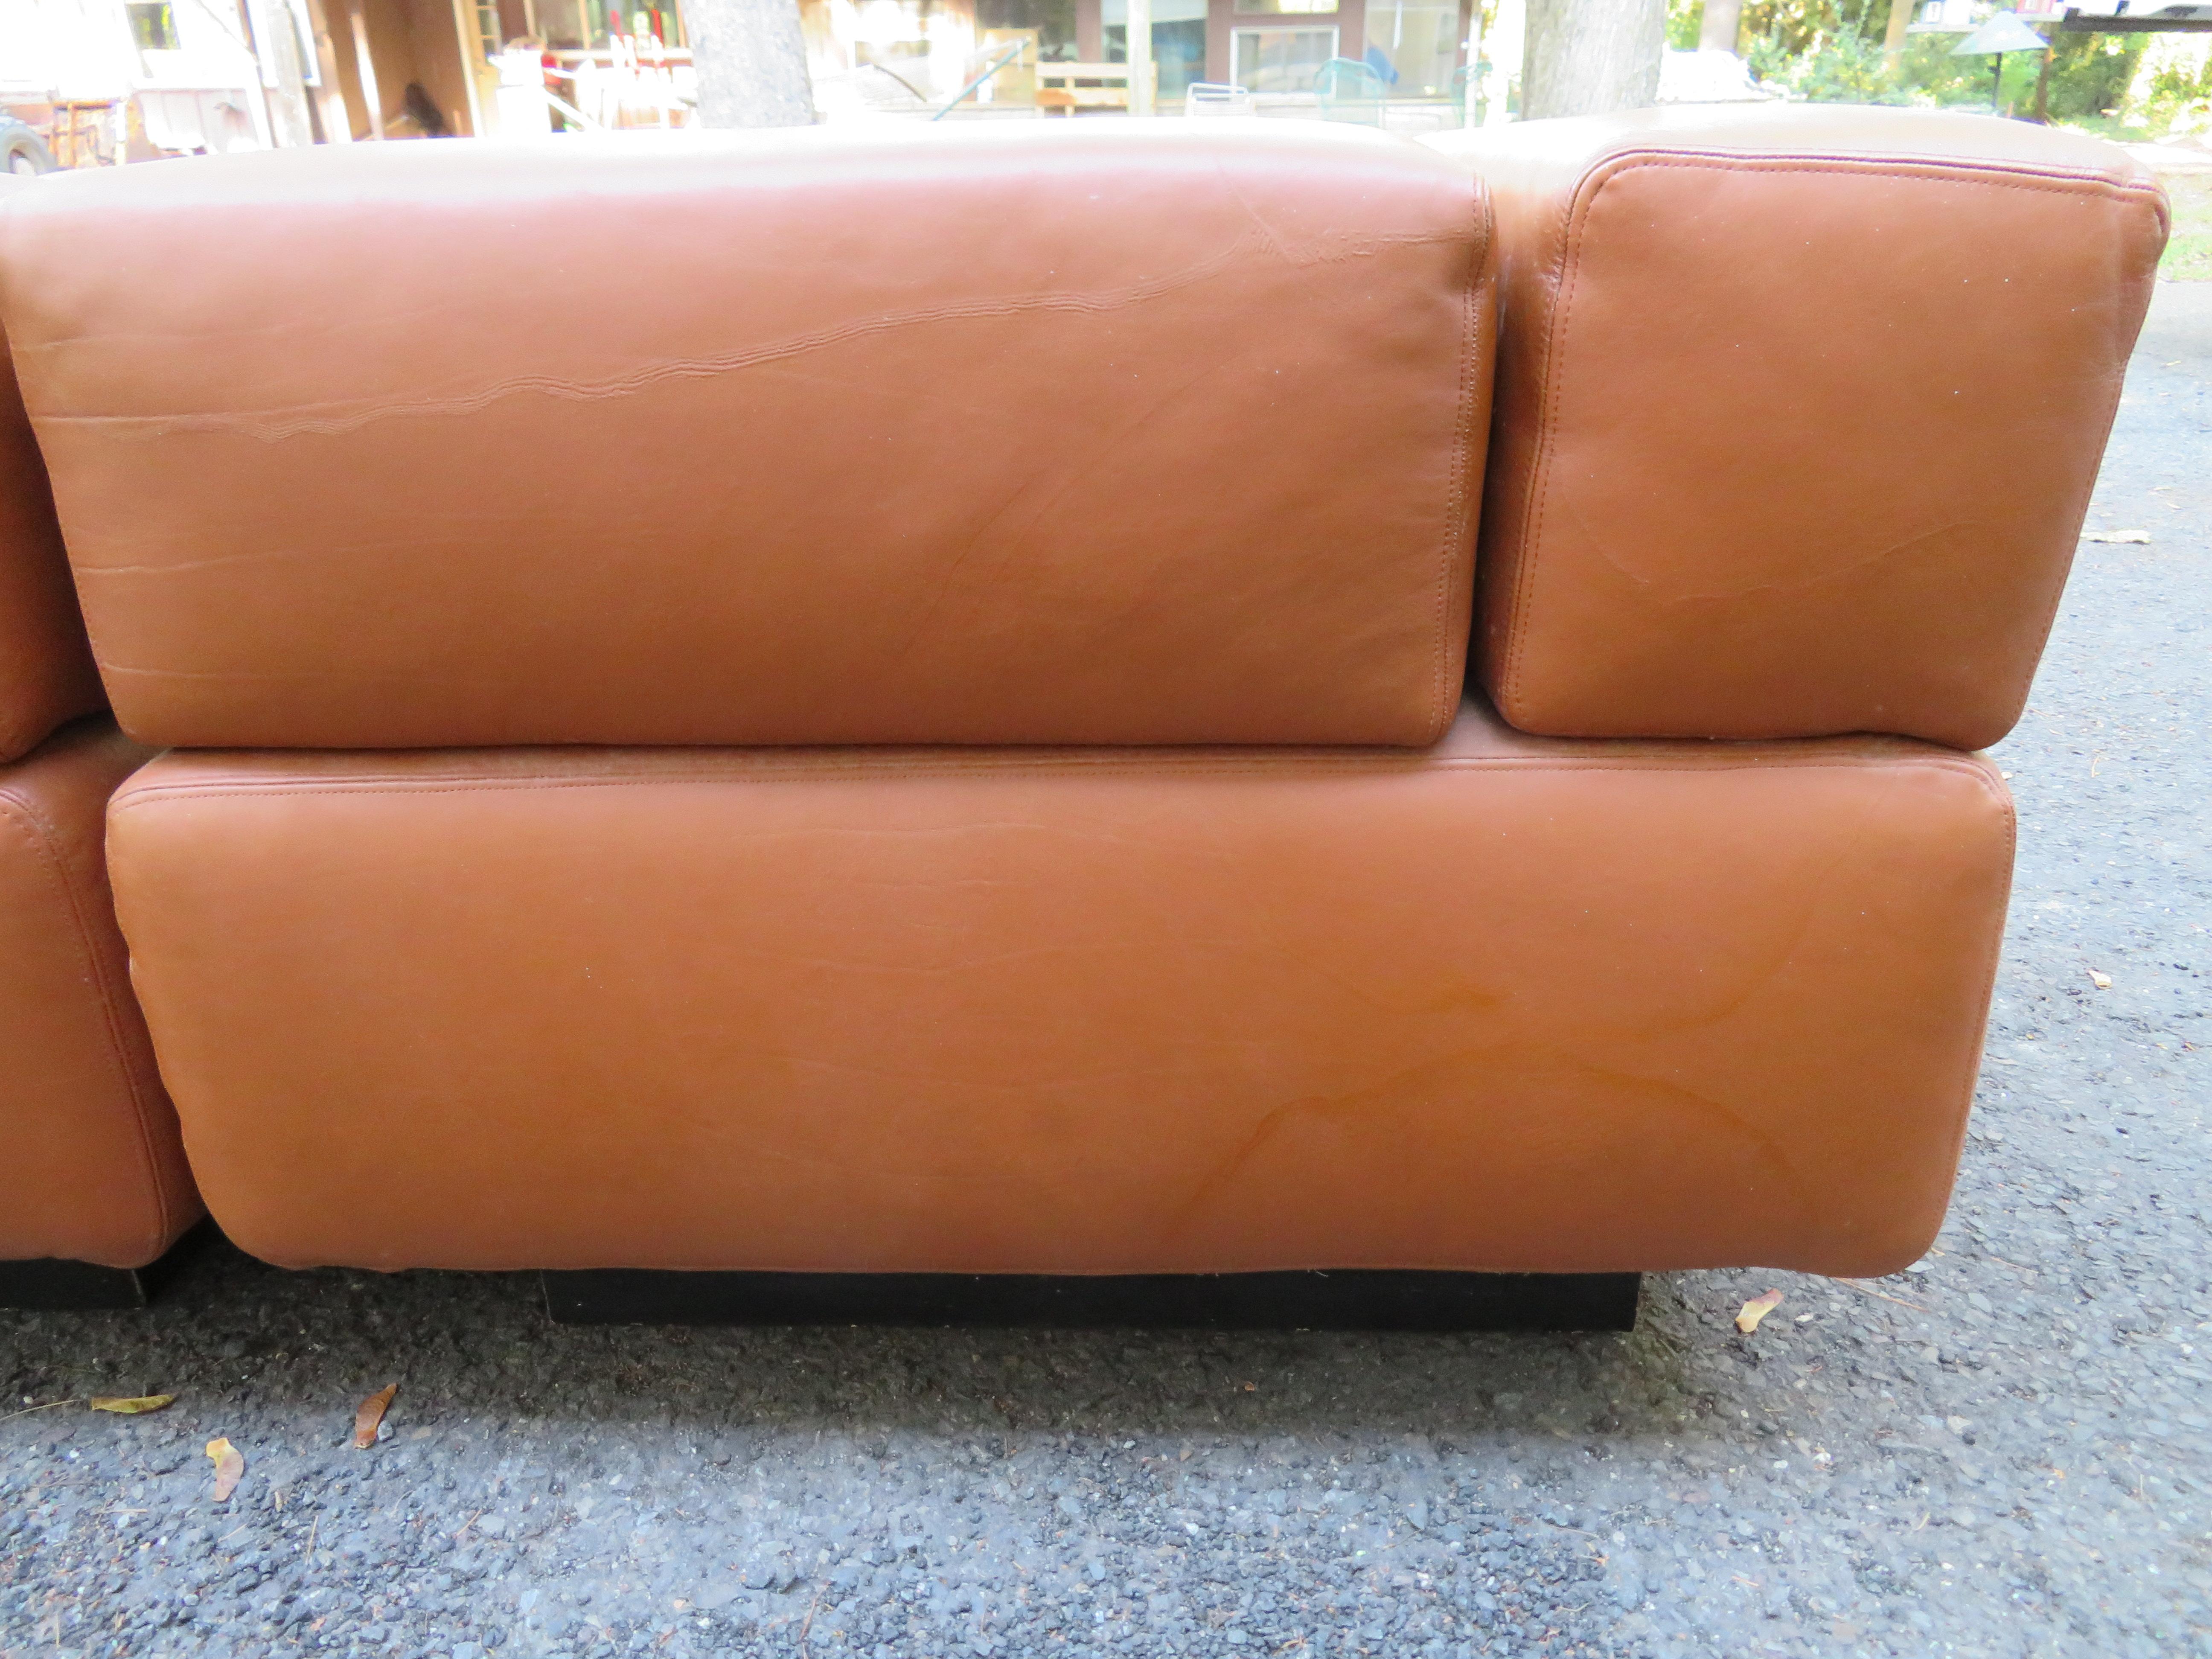 Magnificent 9-Piece Harvey Probber Caramel Brown Leather 'Cubo' Sectional Sofa In Good Condition For Sale In Pemberton, NJ